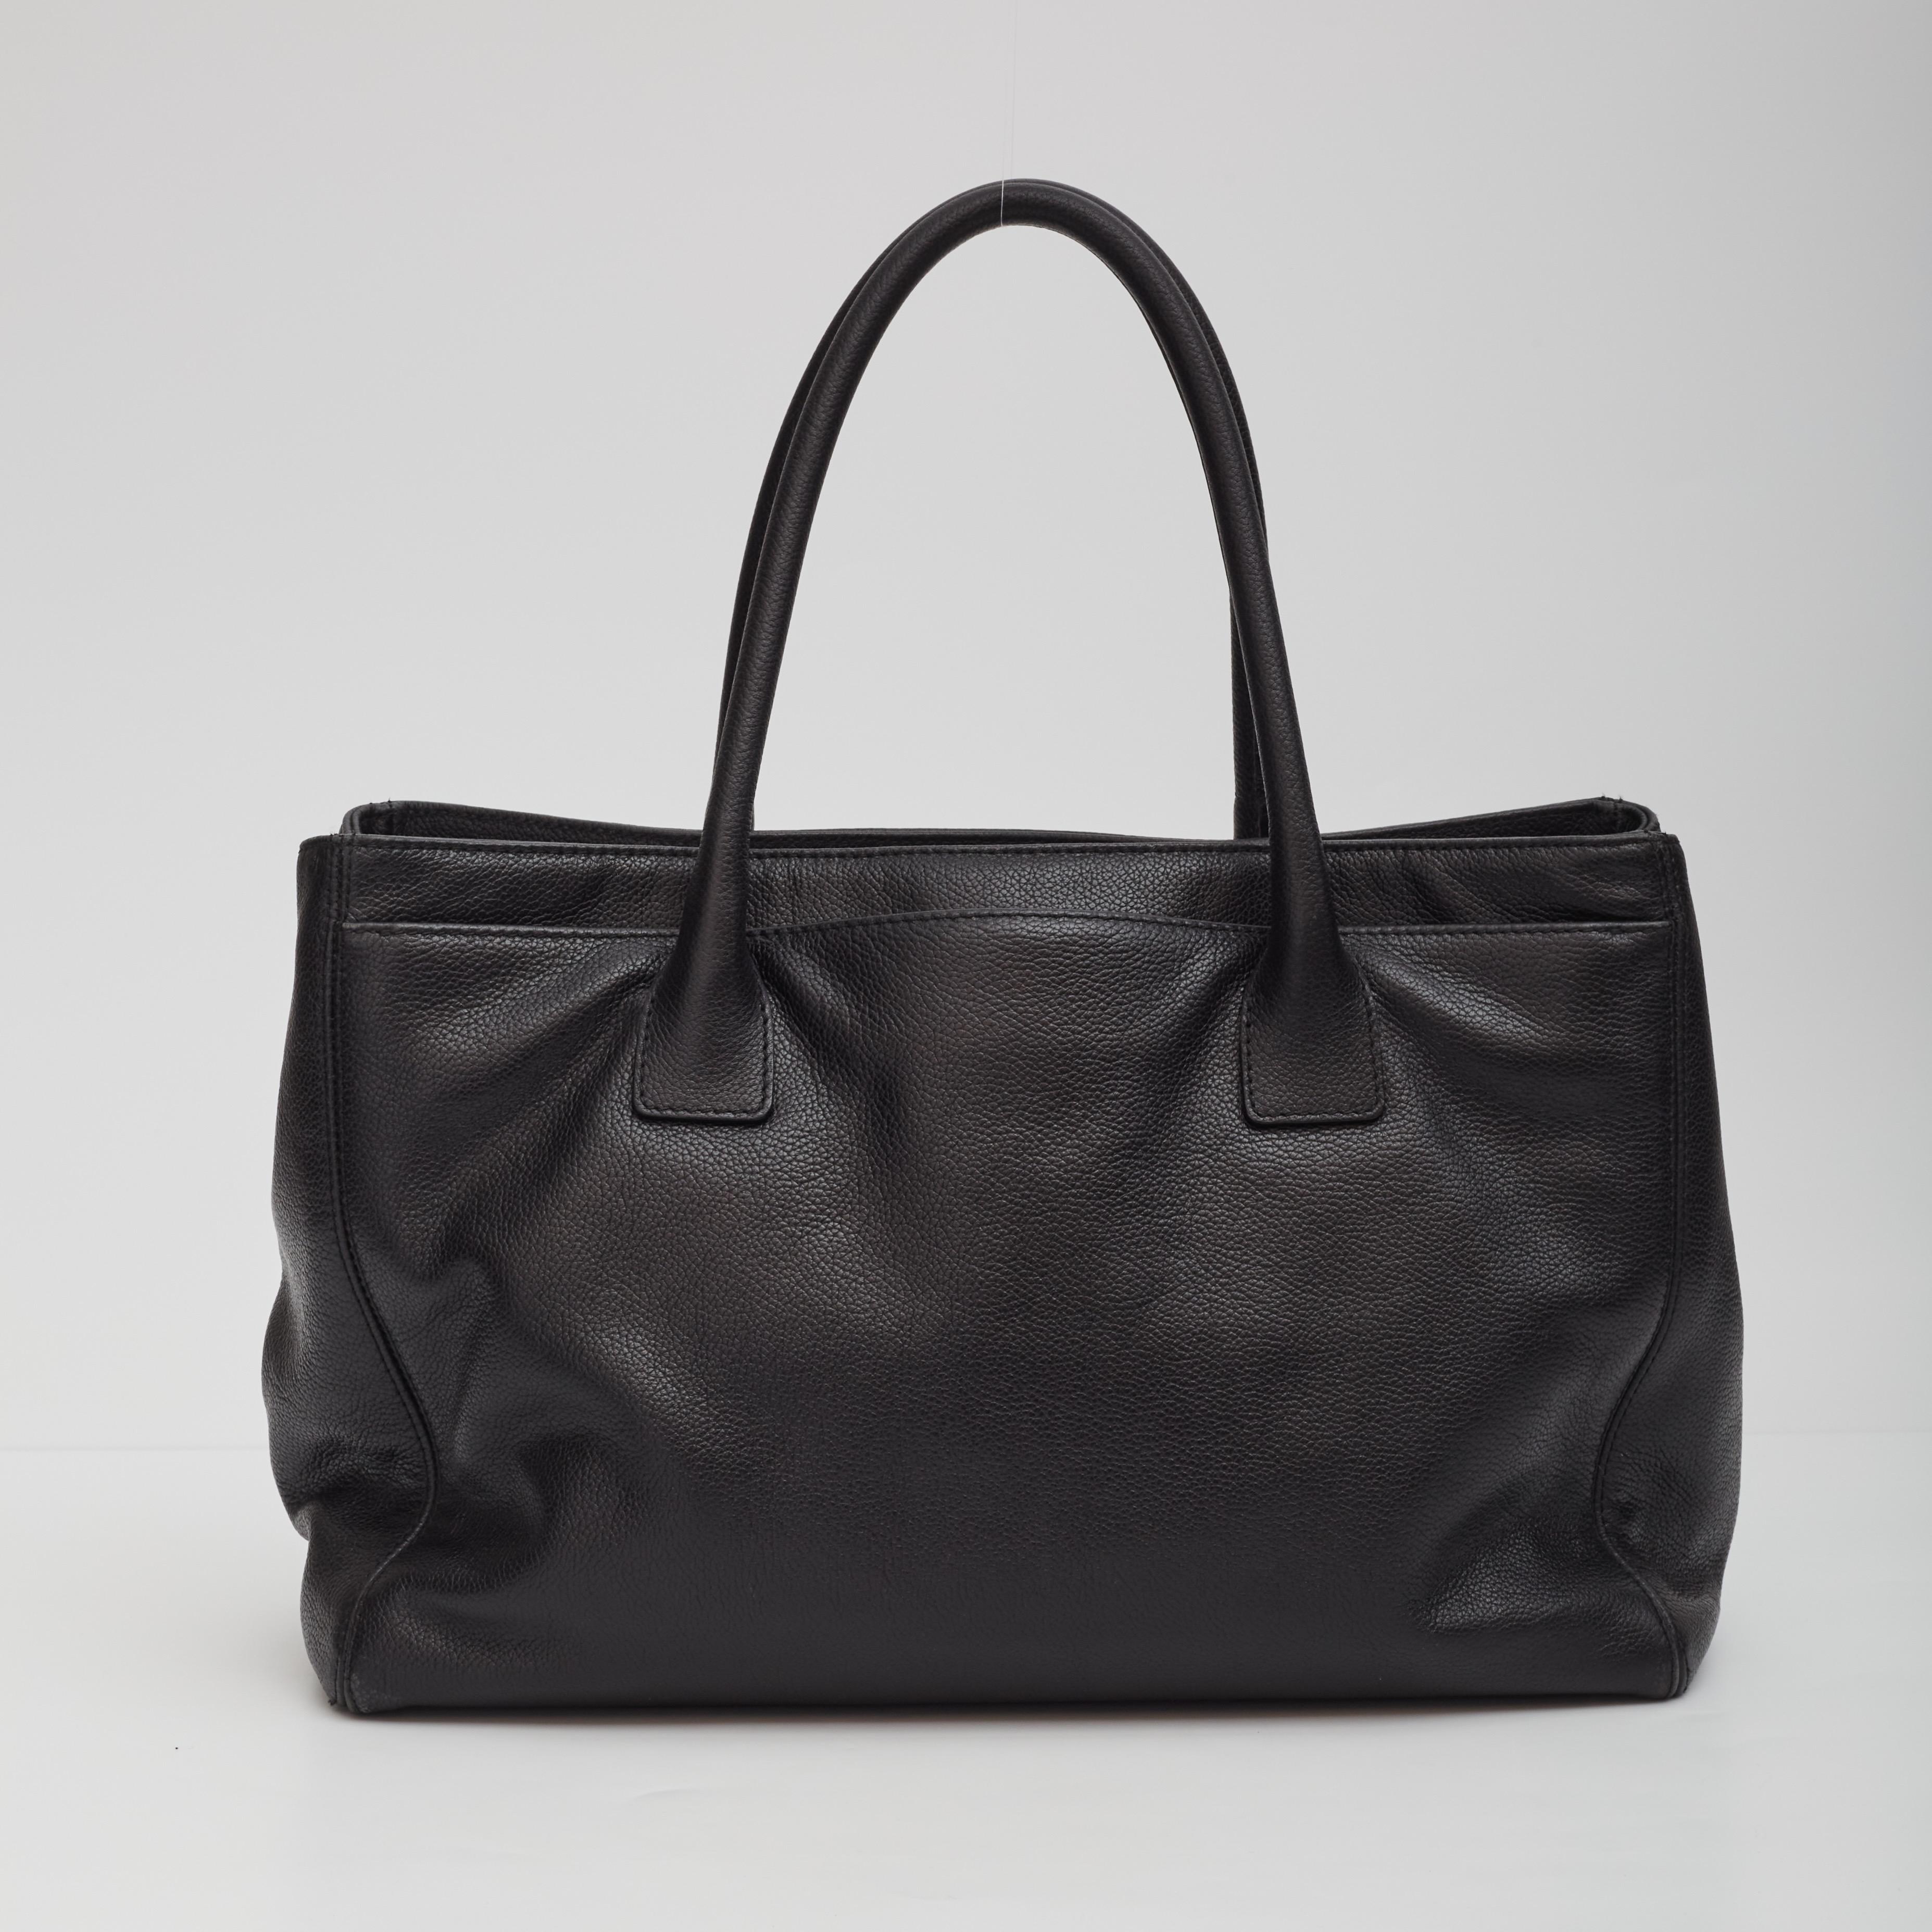 This vintage leather tote from the early 2000’s is made in black caviar leather. Featuring gold tone hardware, an open top with snap closure, front and back full length slip pockets, signature interlocking CC turn lock closure for the front slip